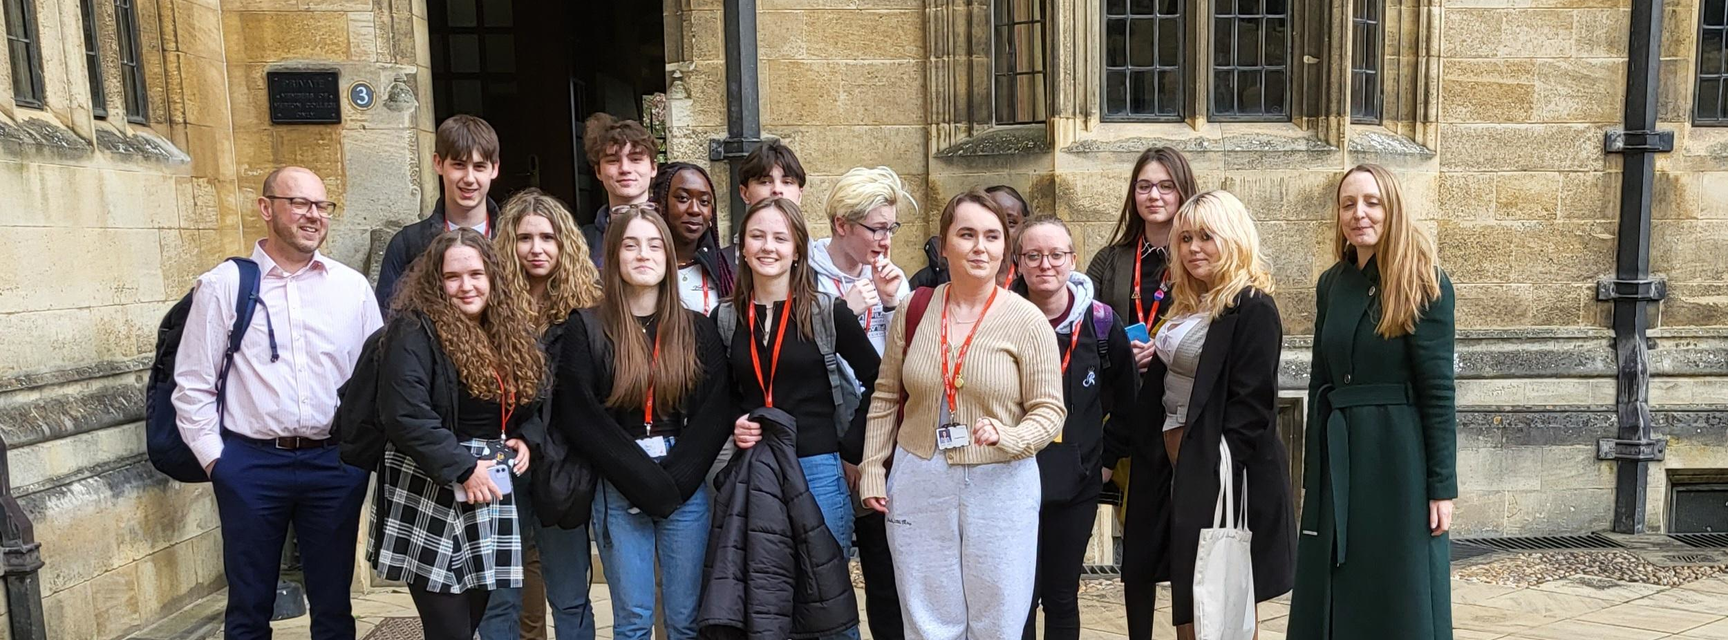 The student participants stand outside of Merton College